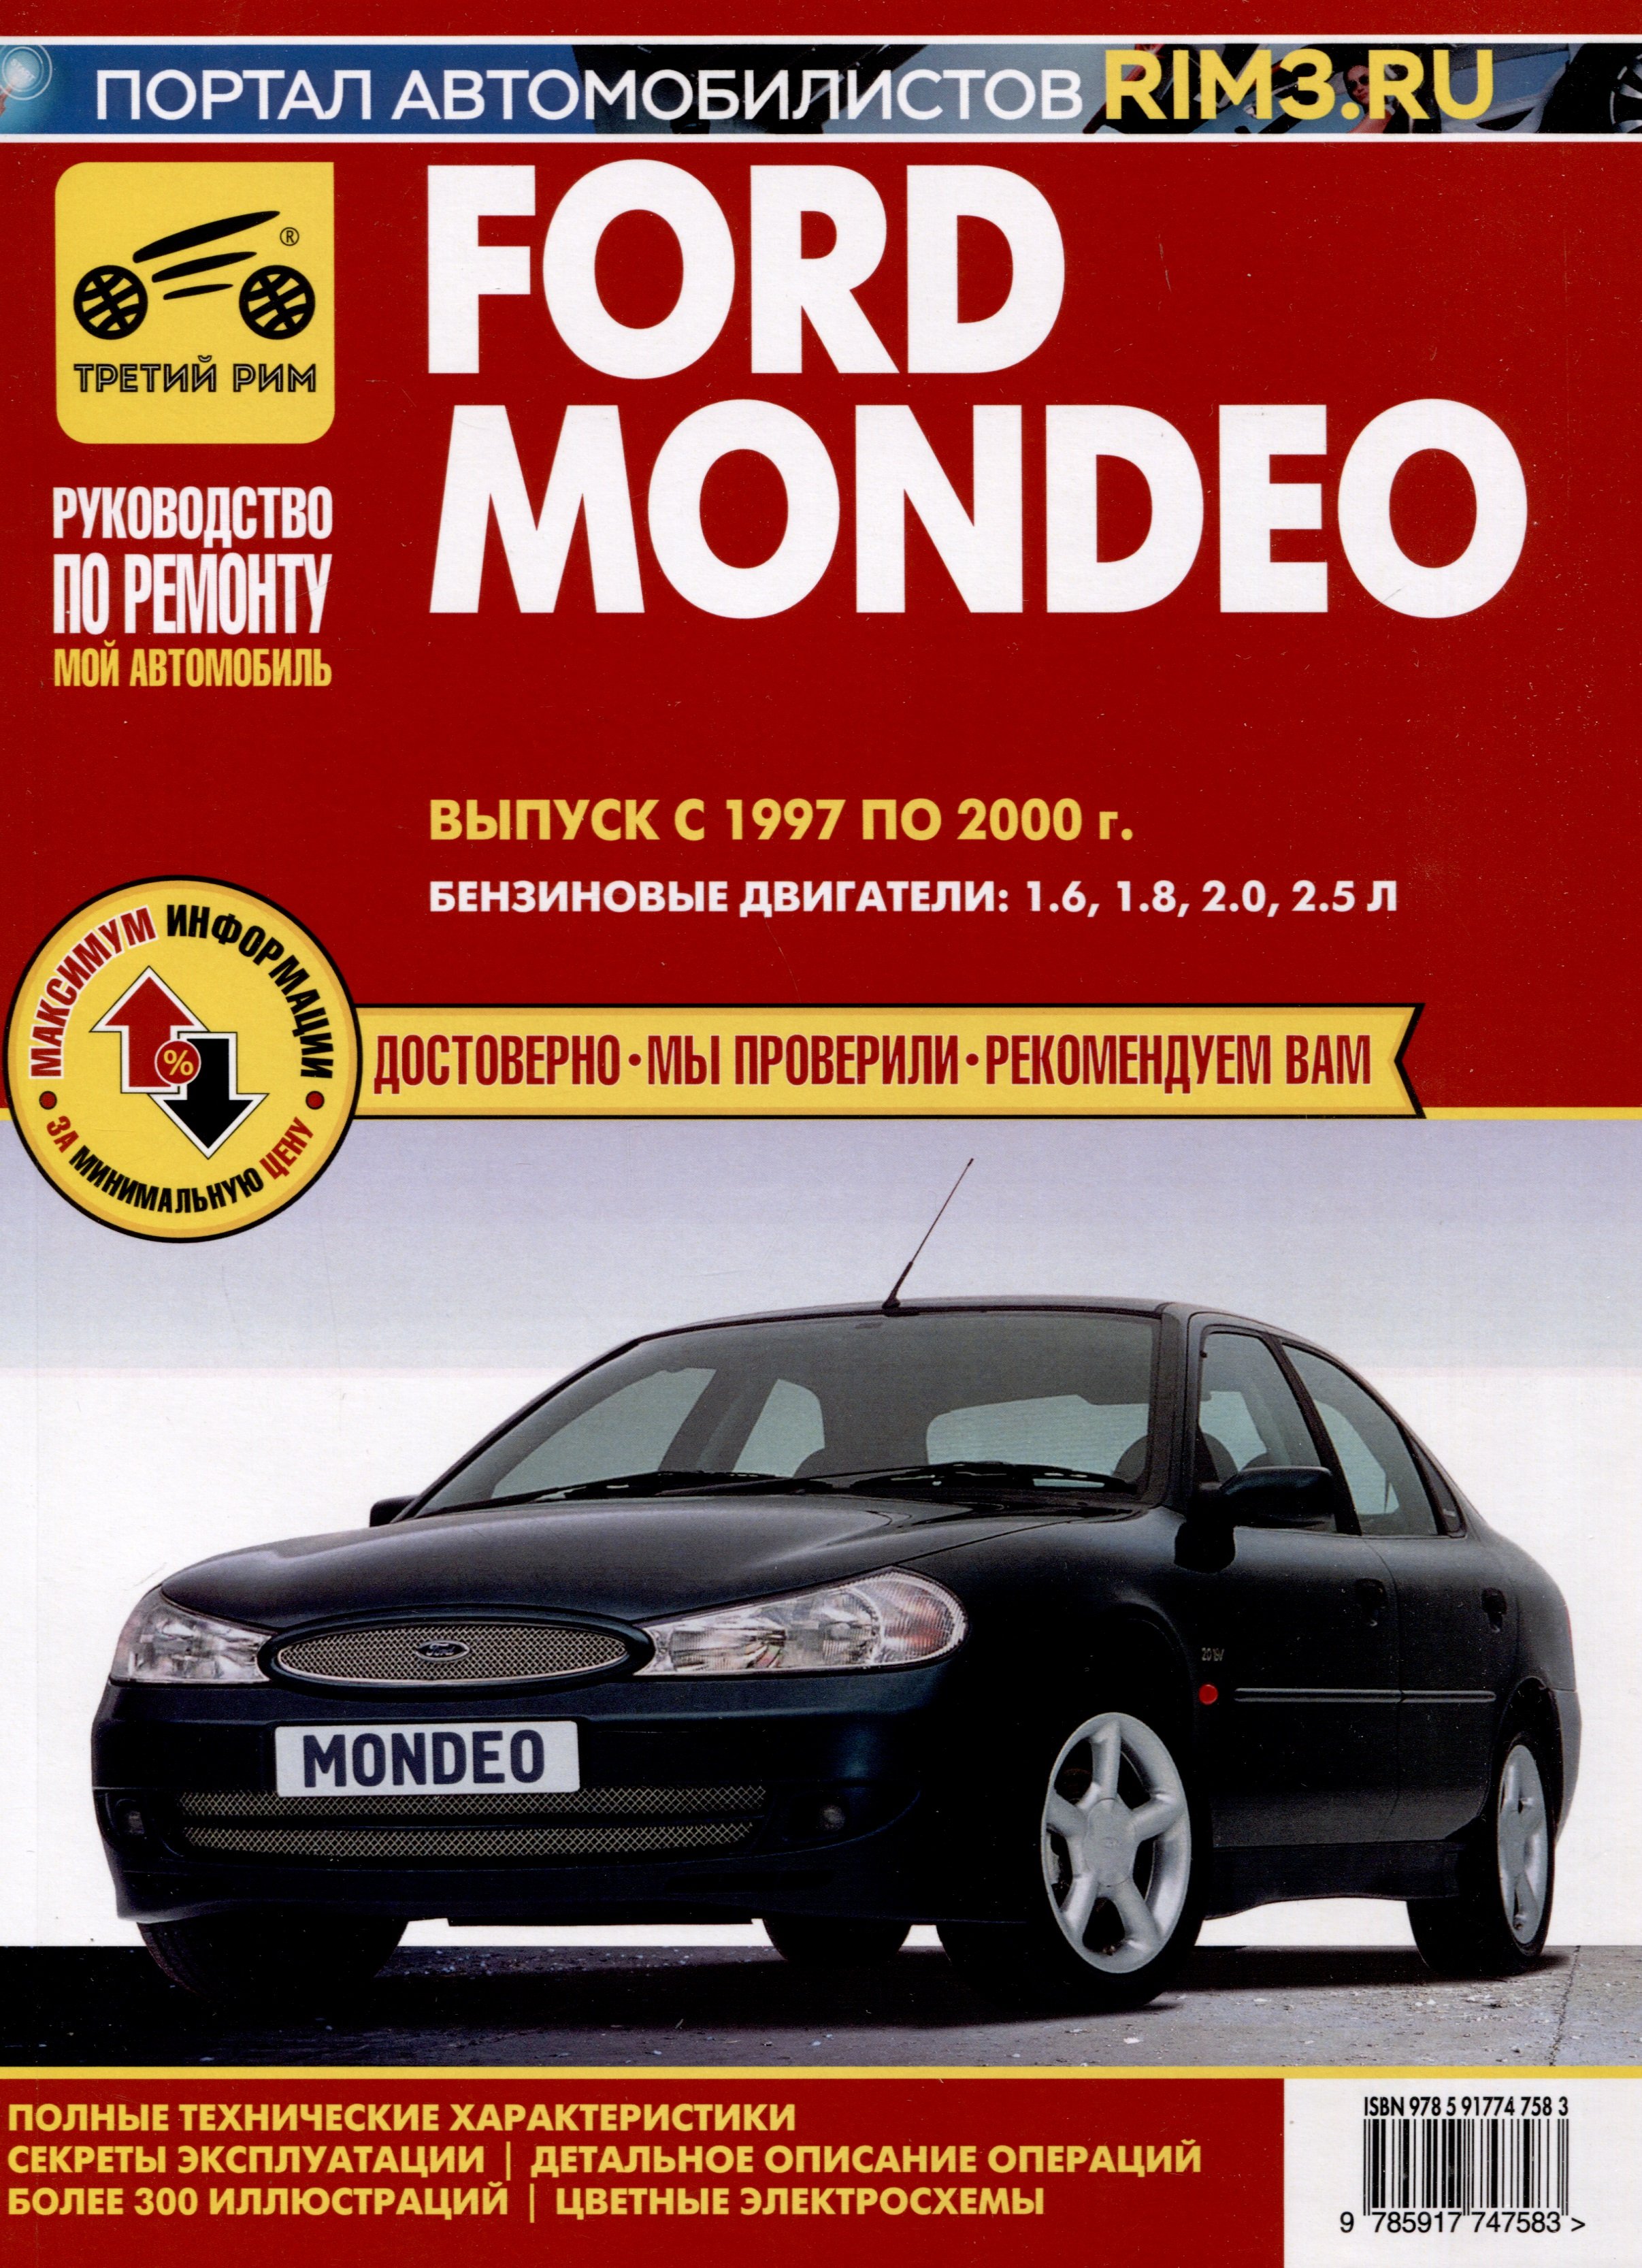 Ford Mondeo 1997-2000 .   ,    .  , ., /